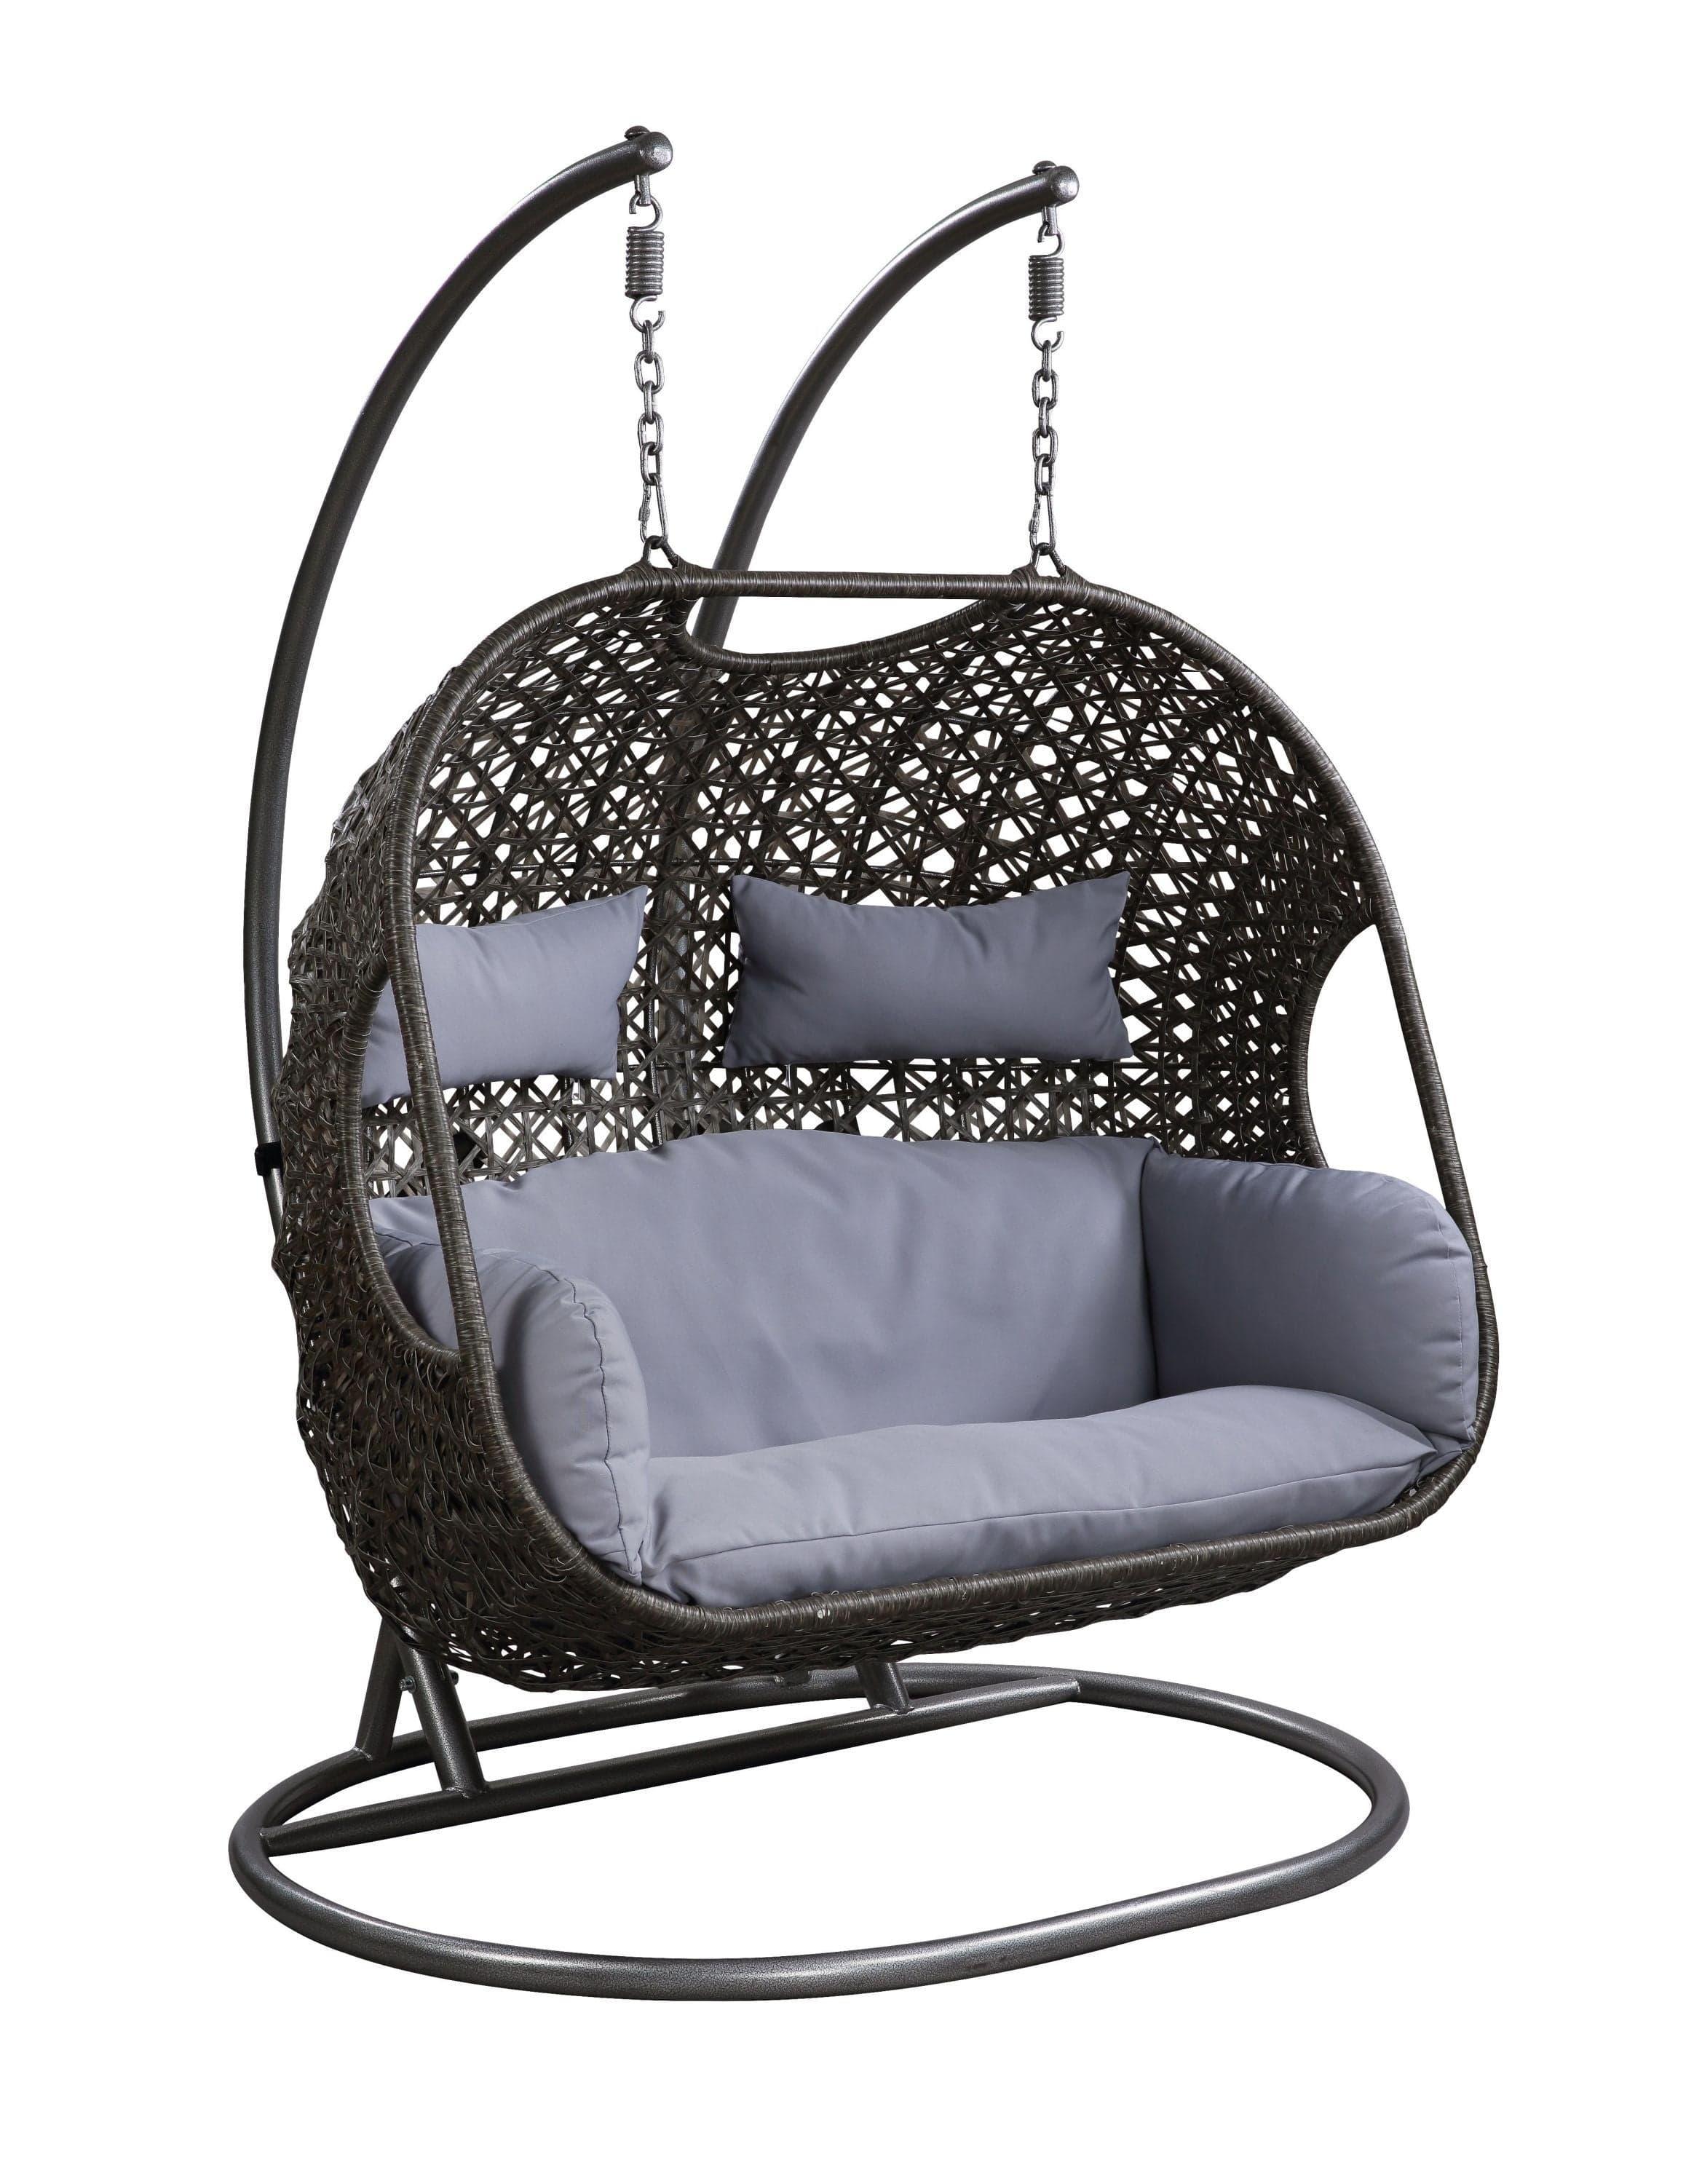 Shop ACME Vasta Patio Swing Chair with Stand, Fabric & Wicker (1Set/3Ctn) 45084 Mademoiselle Home Decor